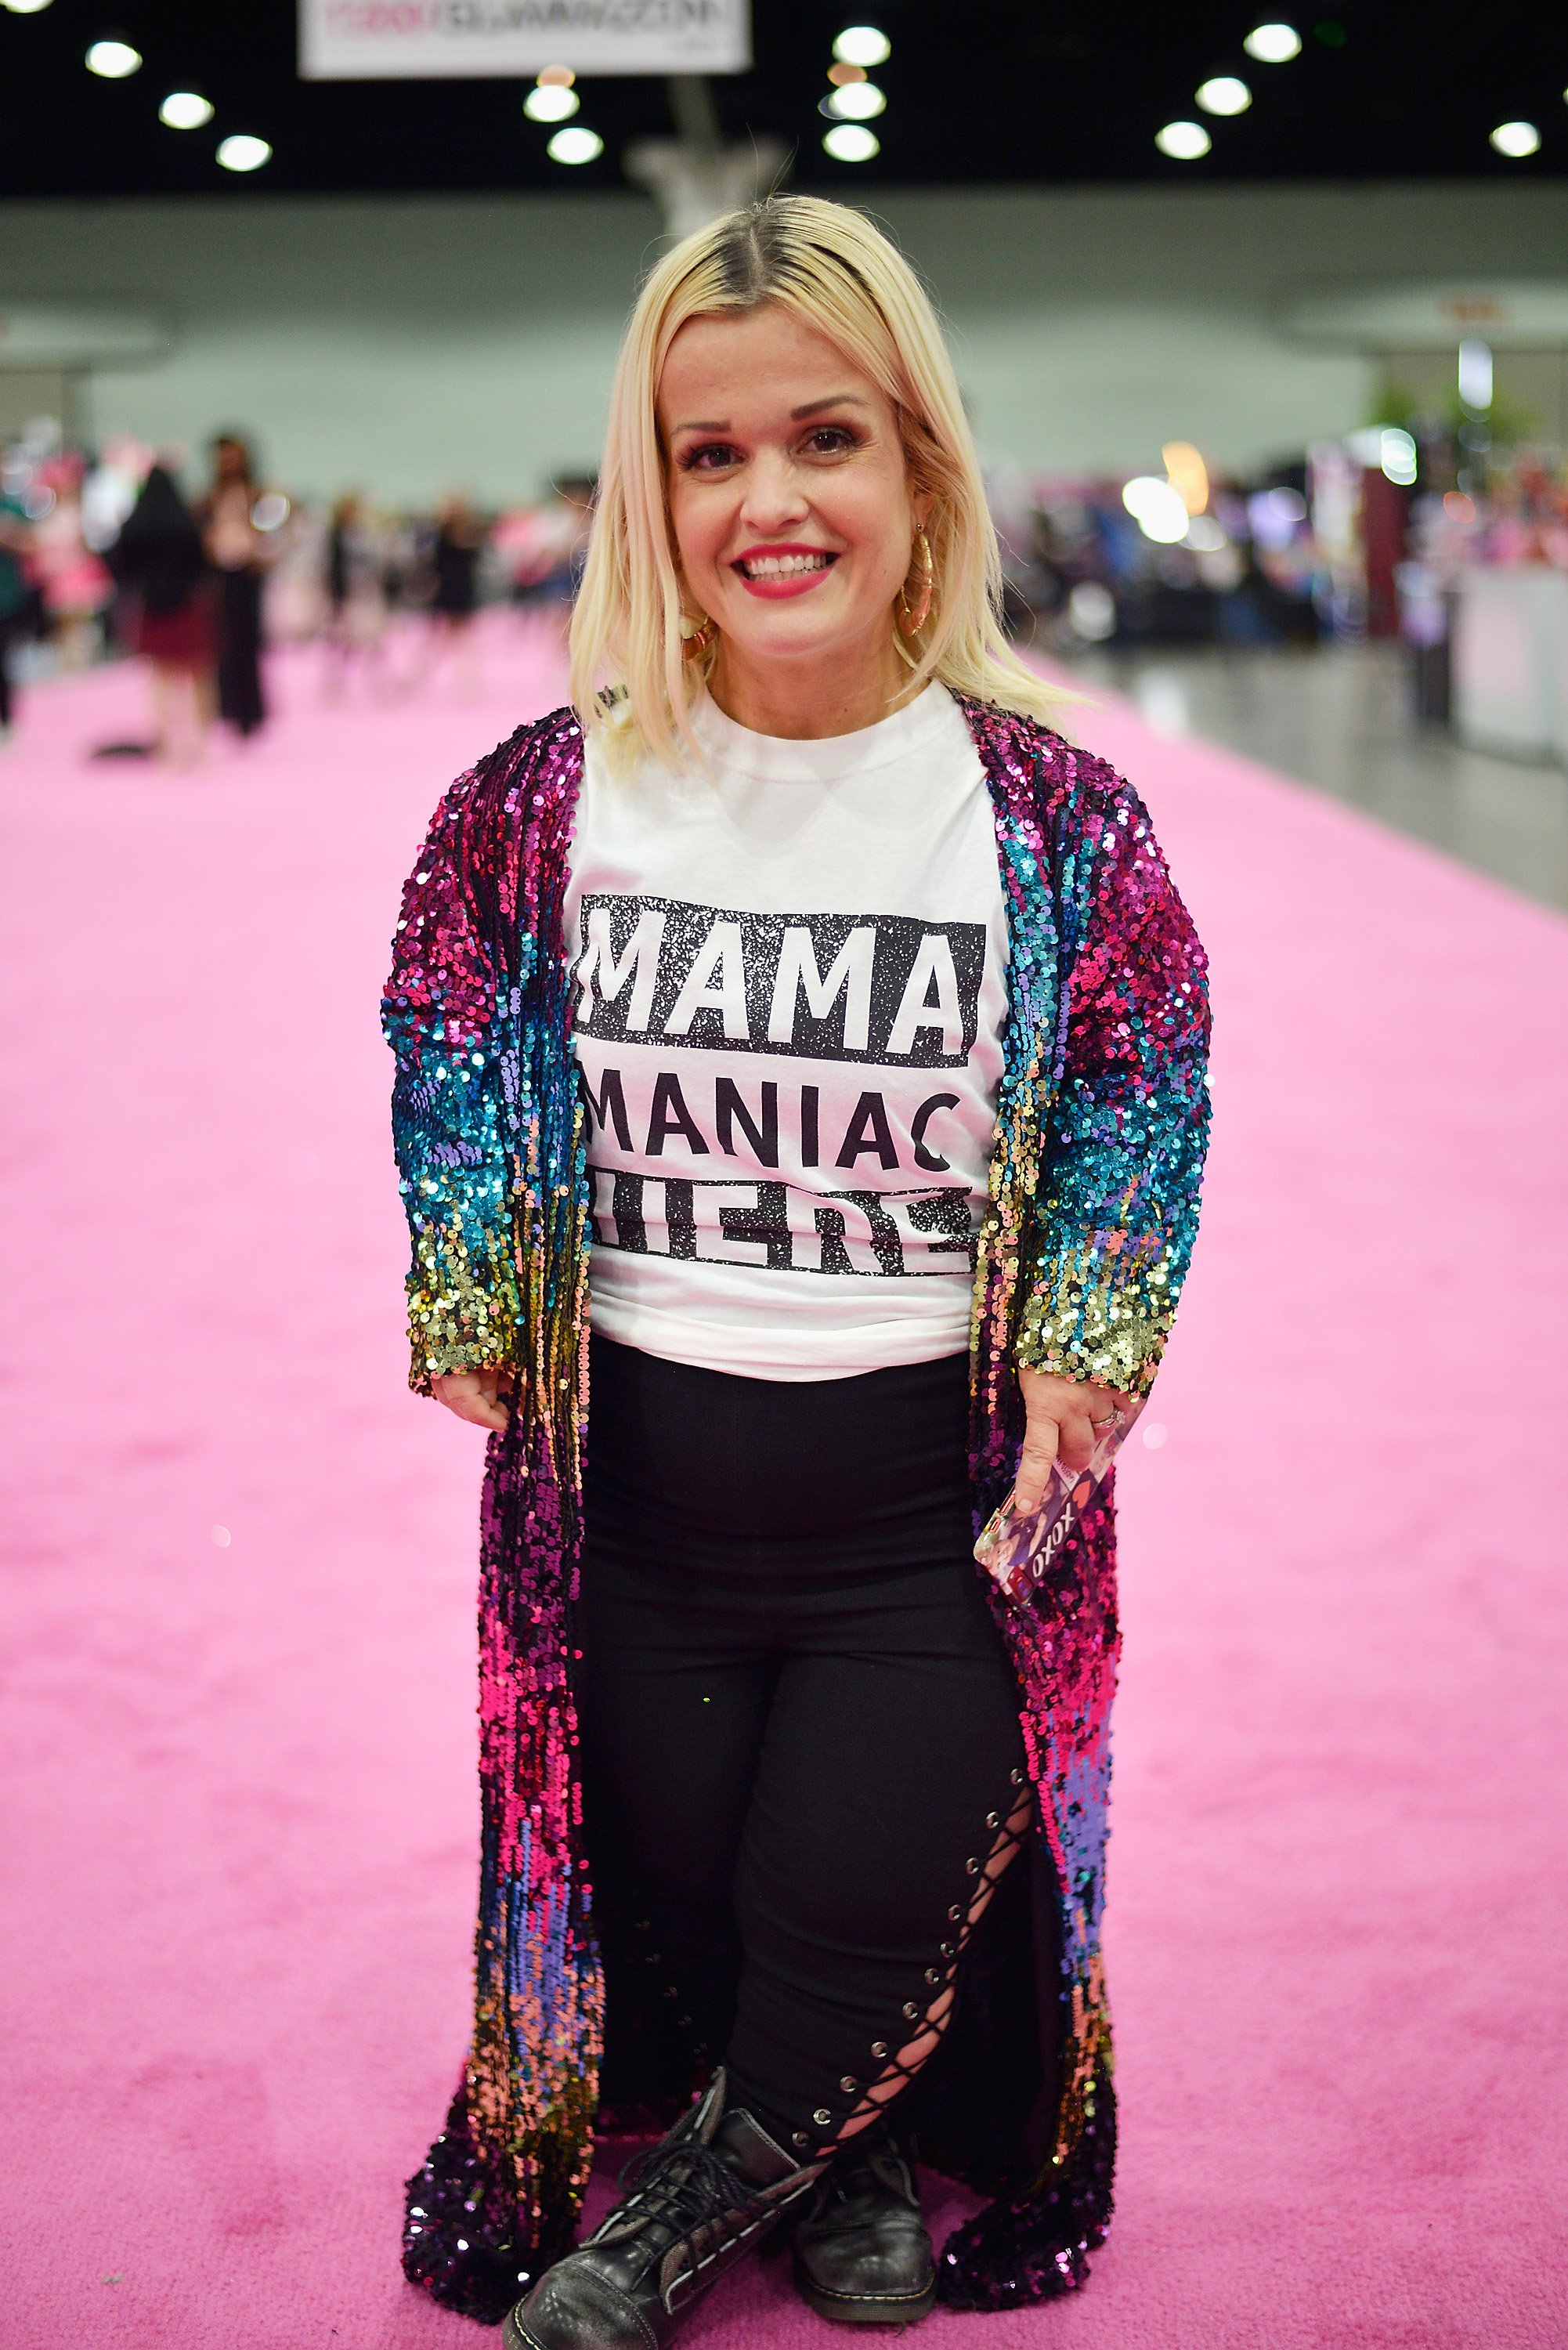 Terra Jolé attends RuPaul's DragCon in Los Angeles, California on May 13, 2018 | Photo: Getty Images